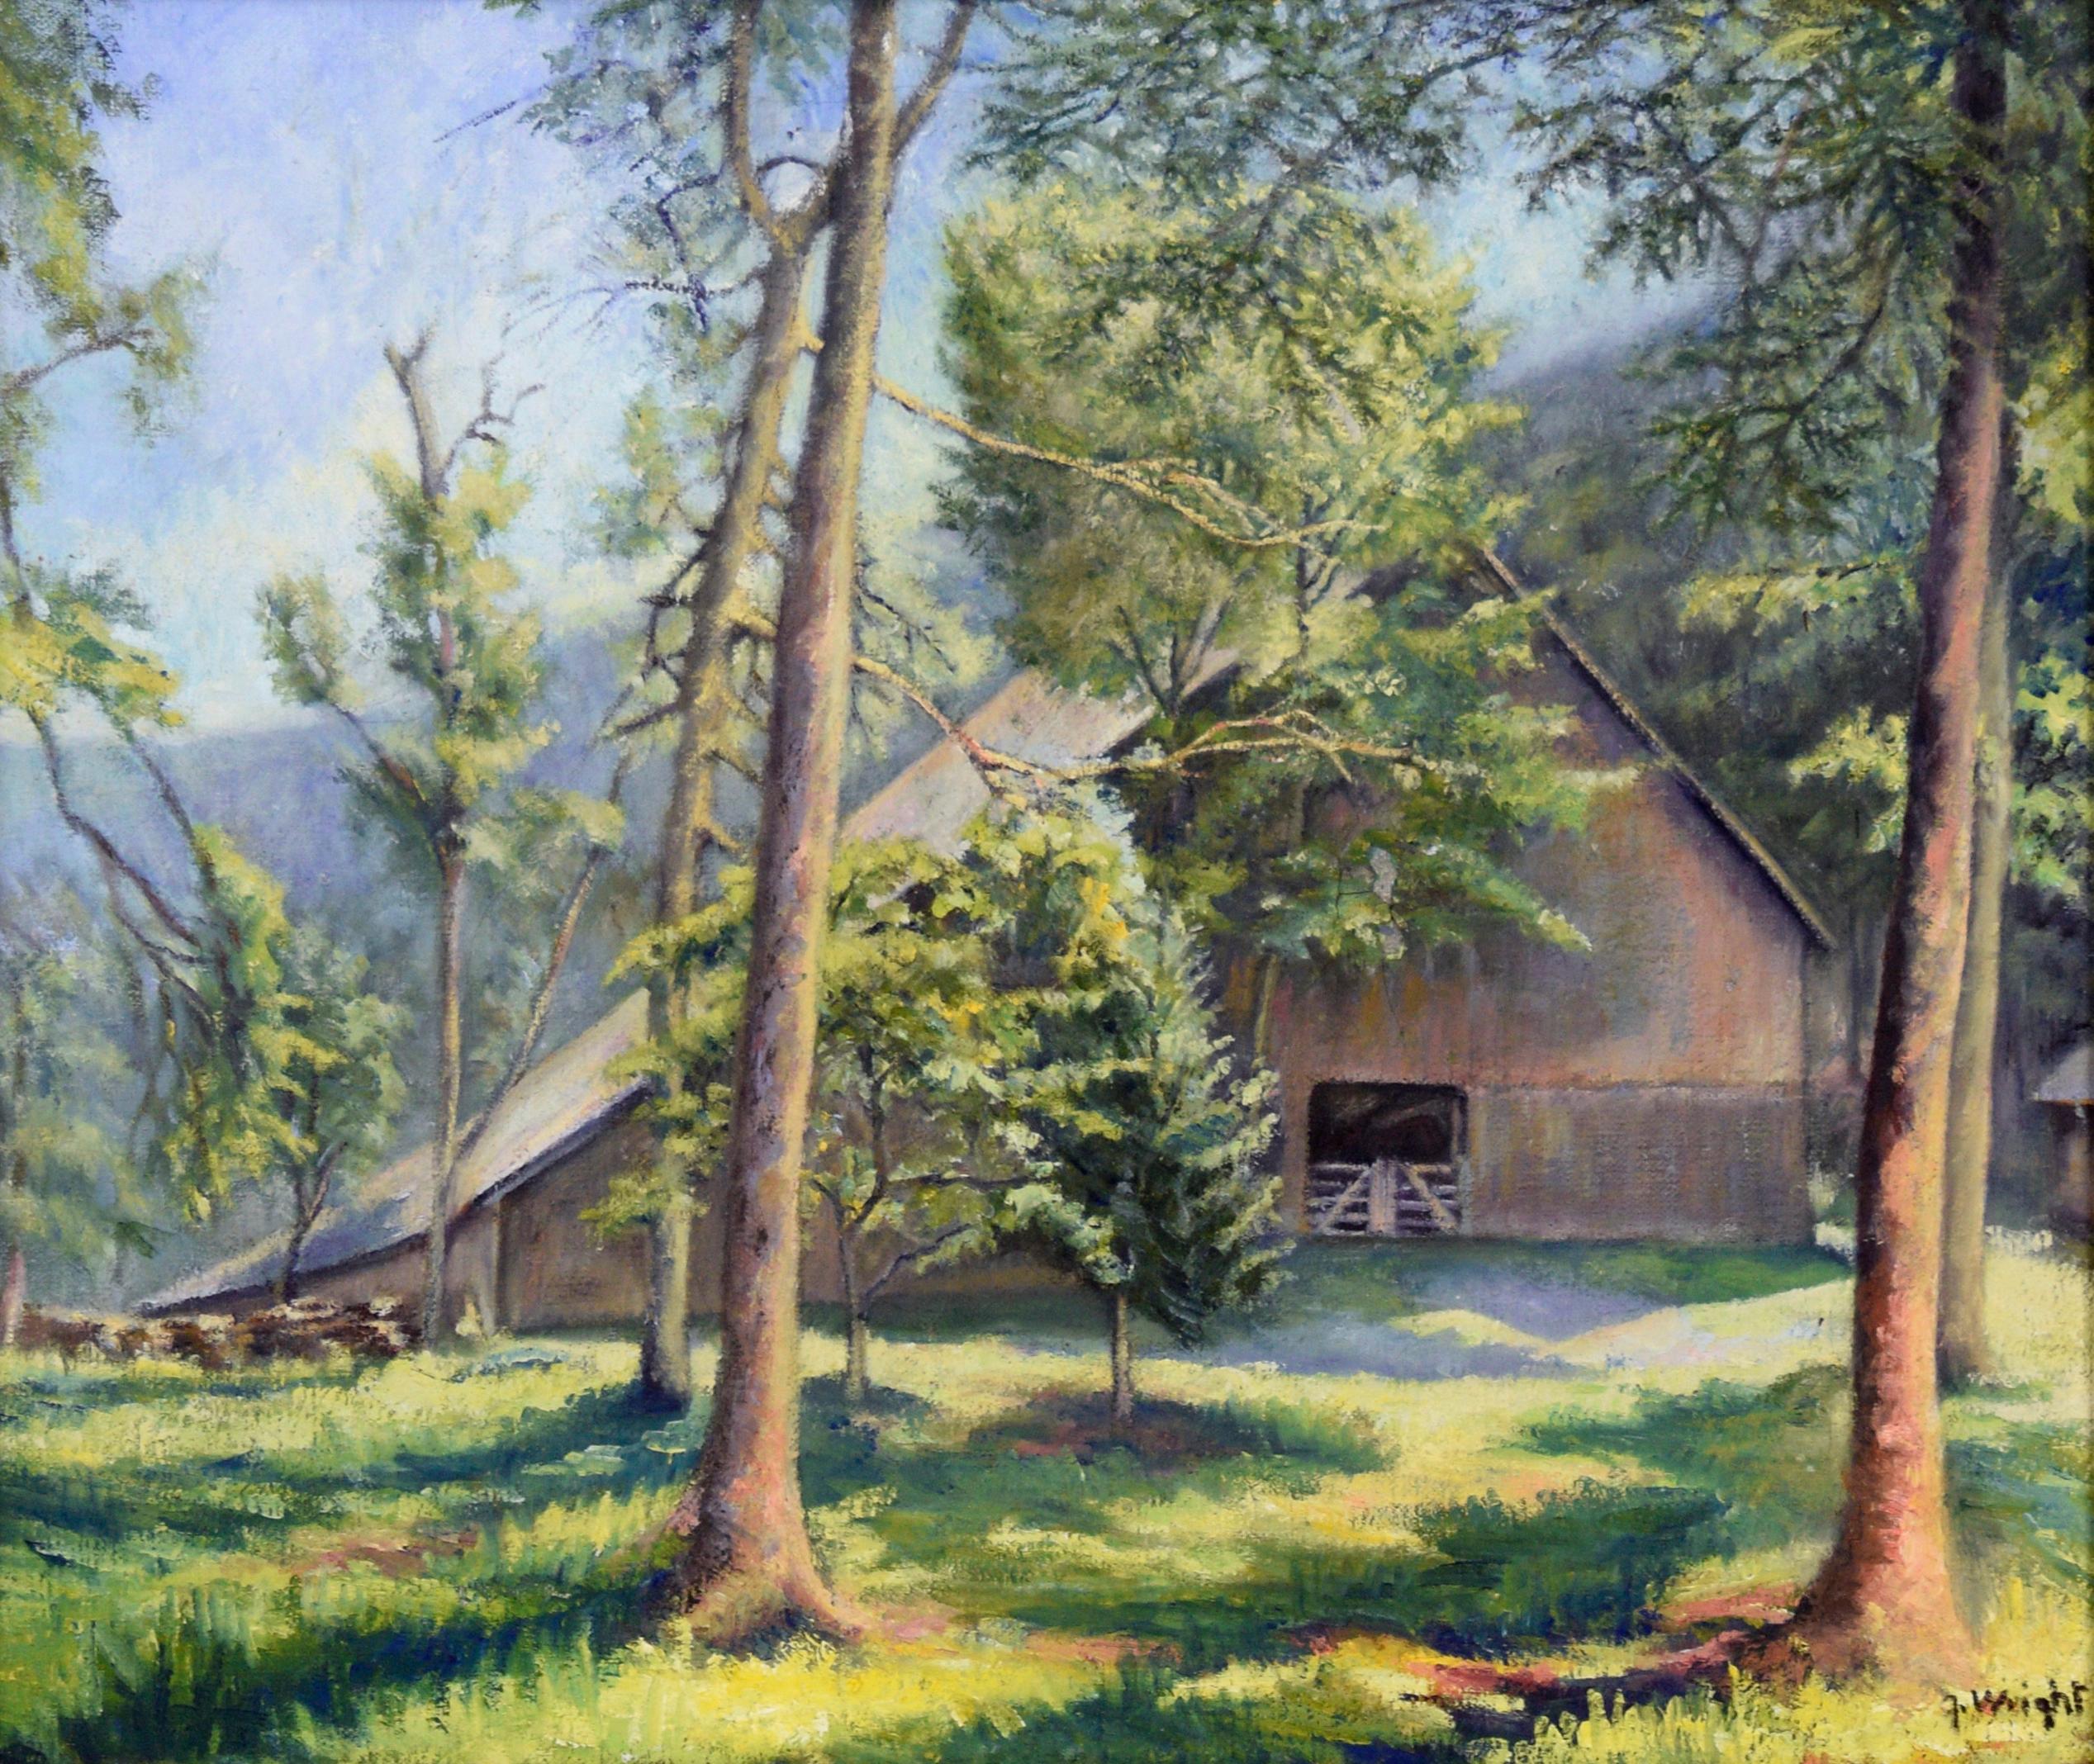 Horse Stables in the Valley - Farm Landscape - Painting by Unknown